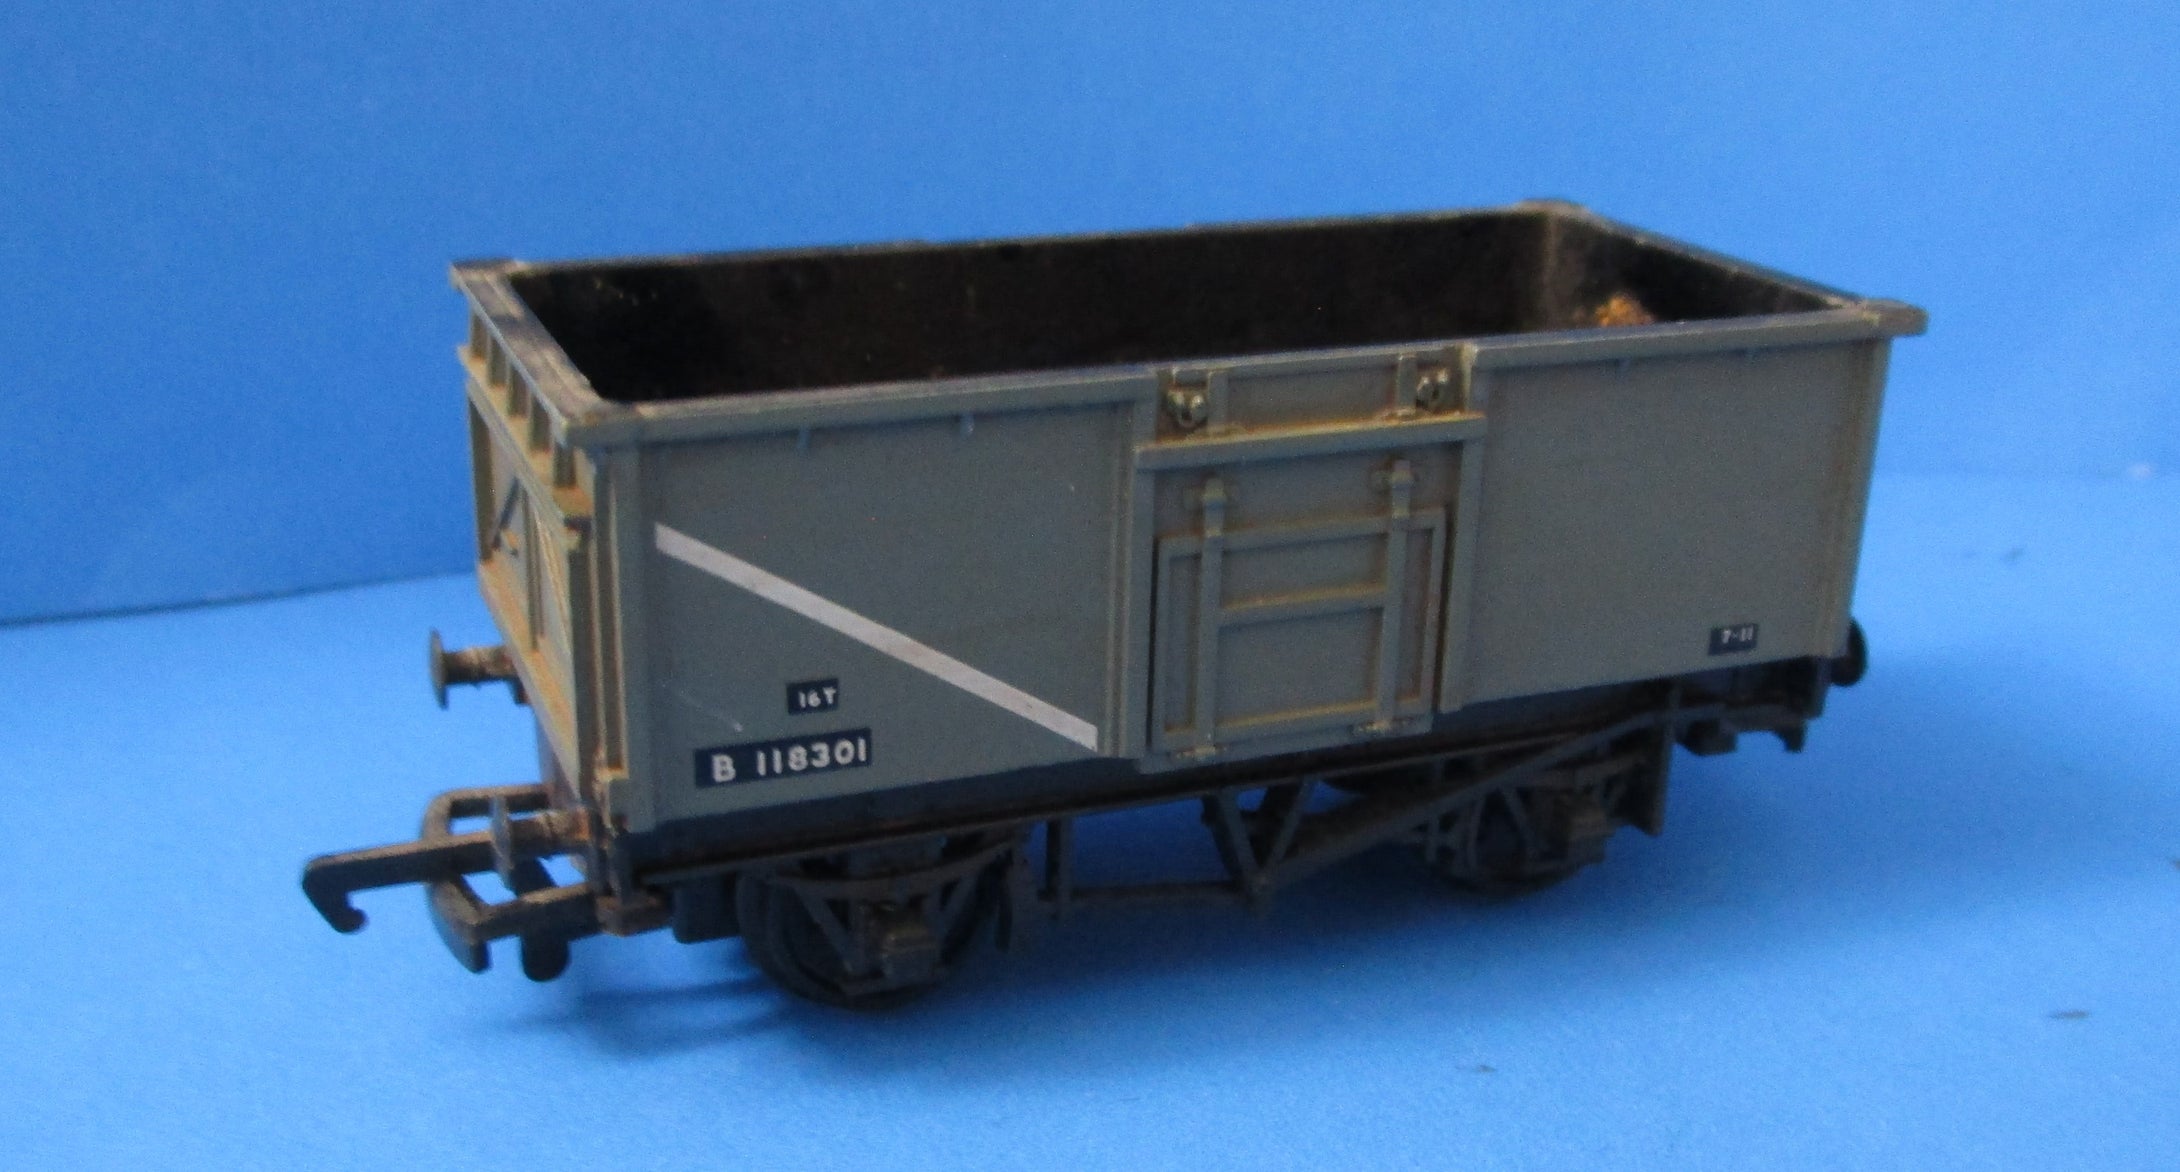 37403 Mainline 16T Mineral Wagon B118301 - UNBOXED